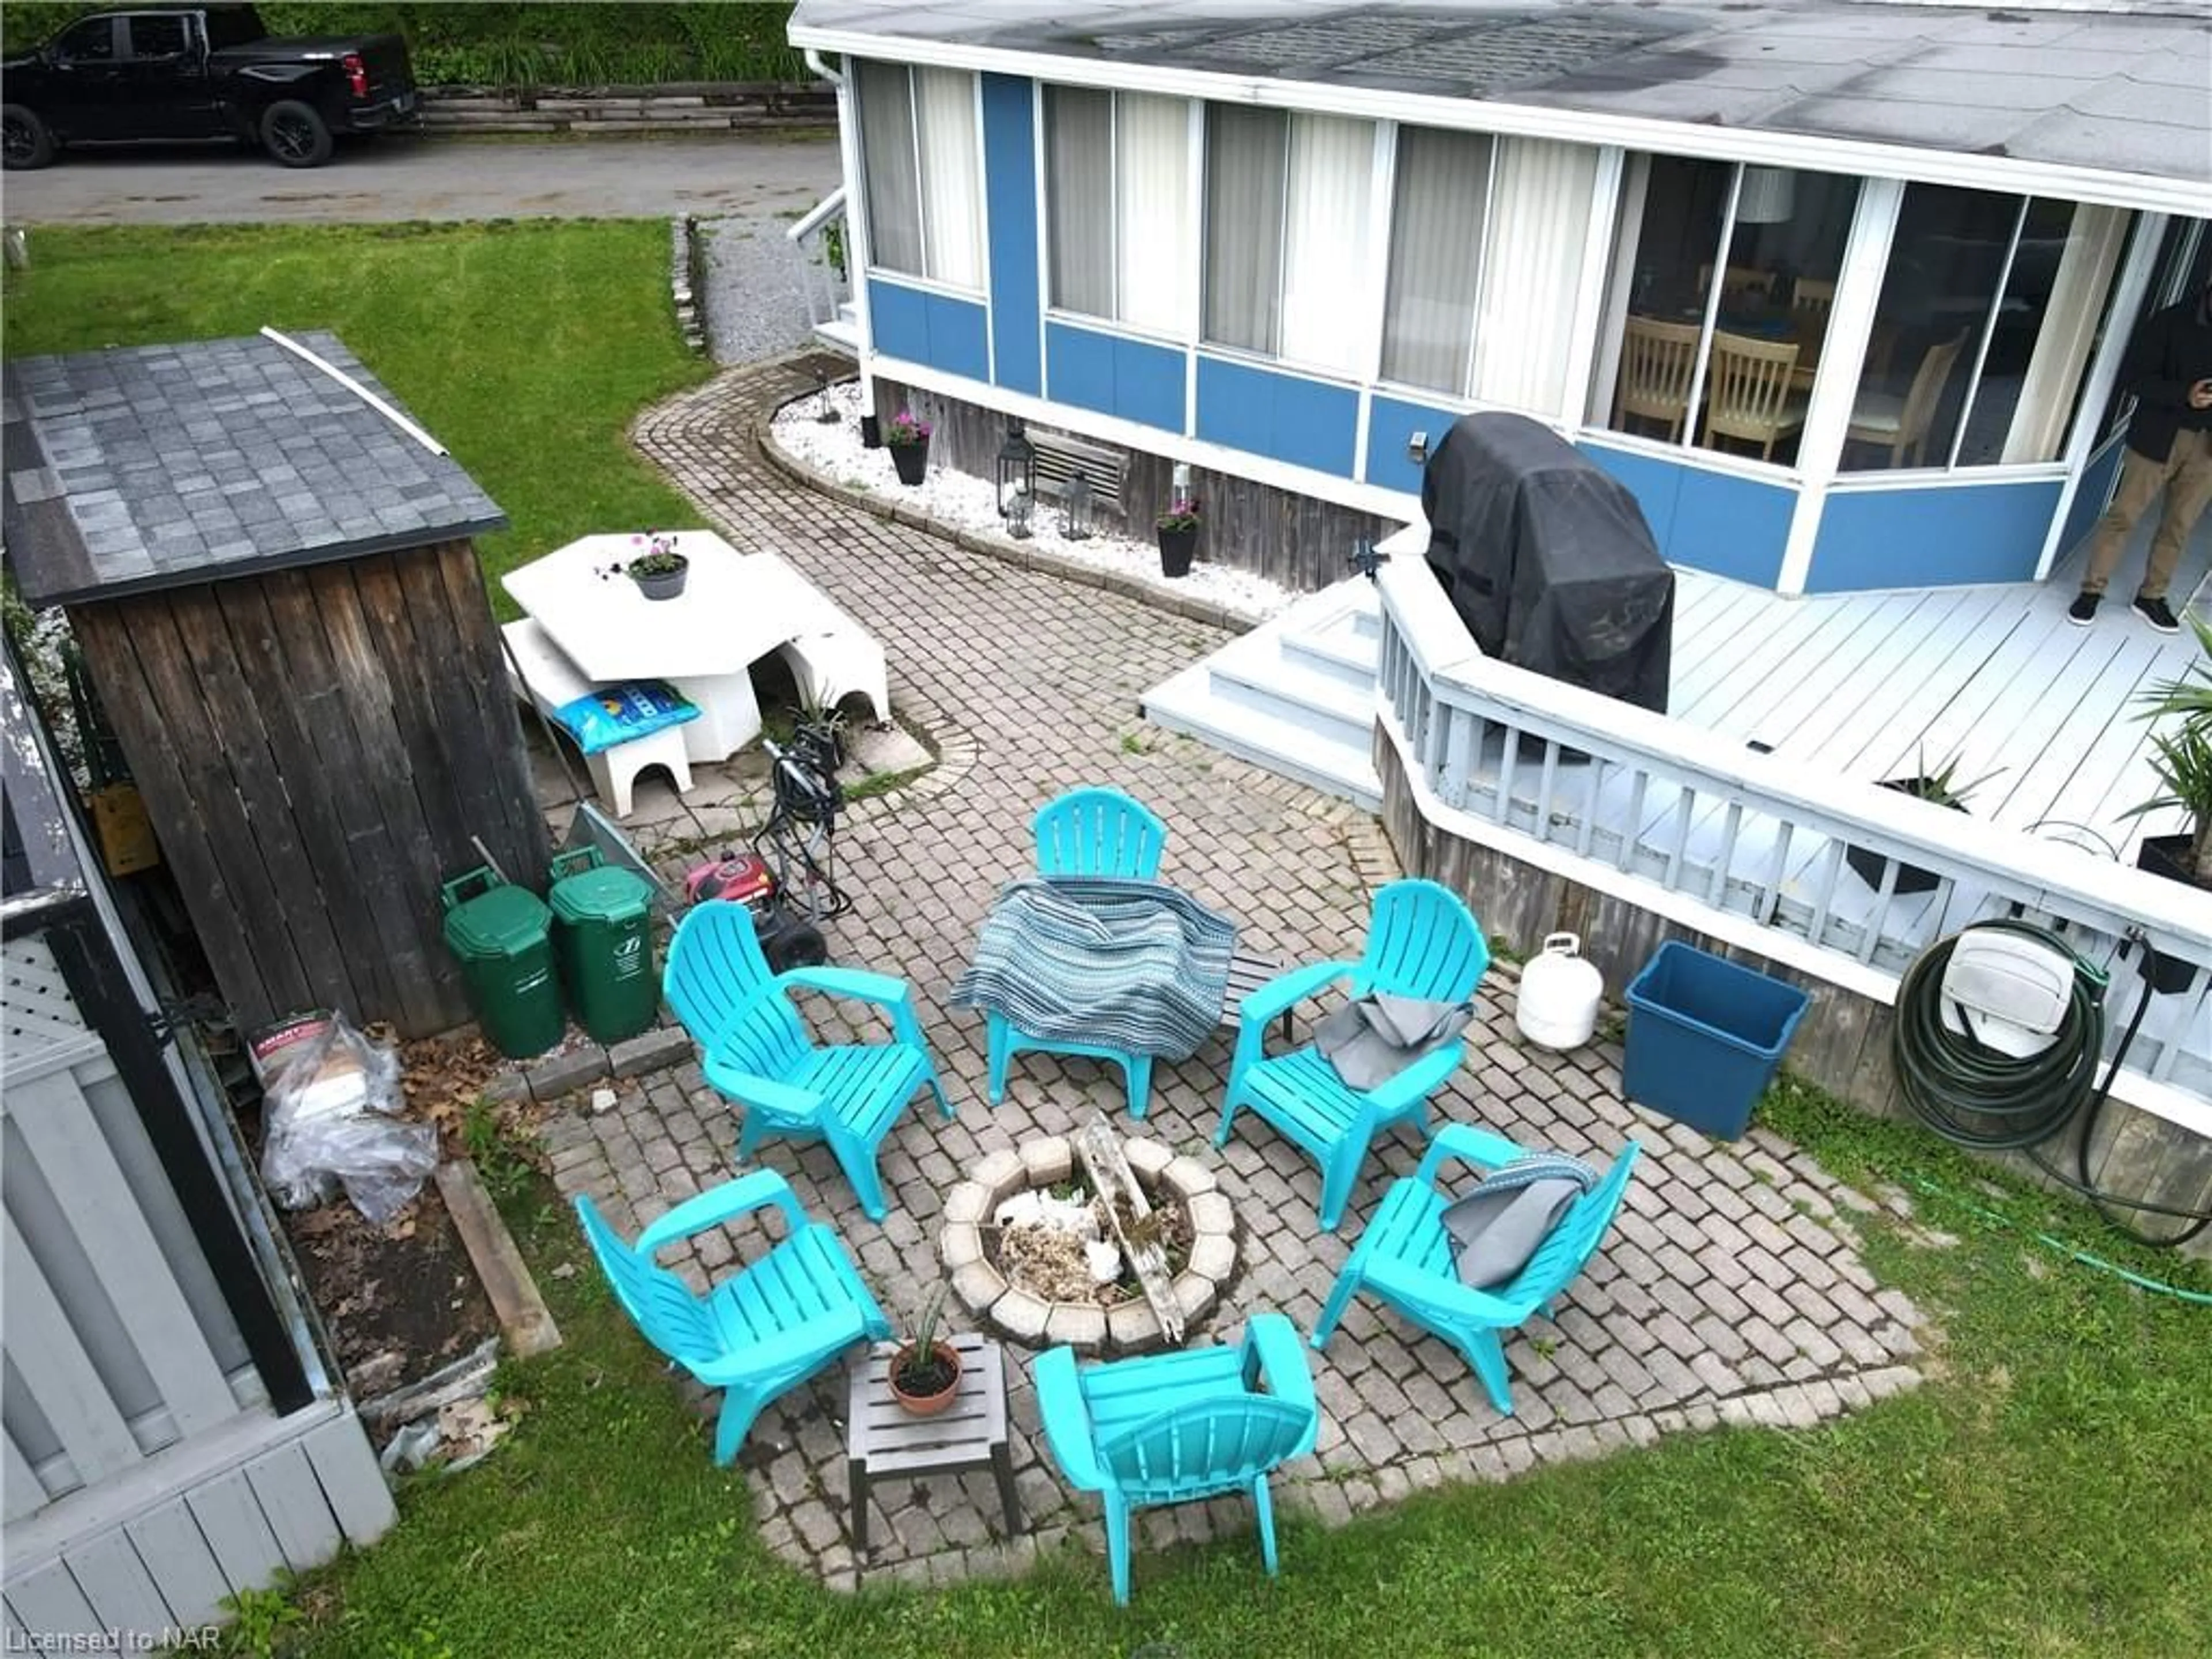 Patio for 9 Fishermans Hill, Sherkston Ontario L0S 1R0